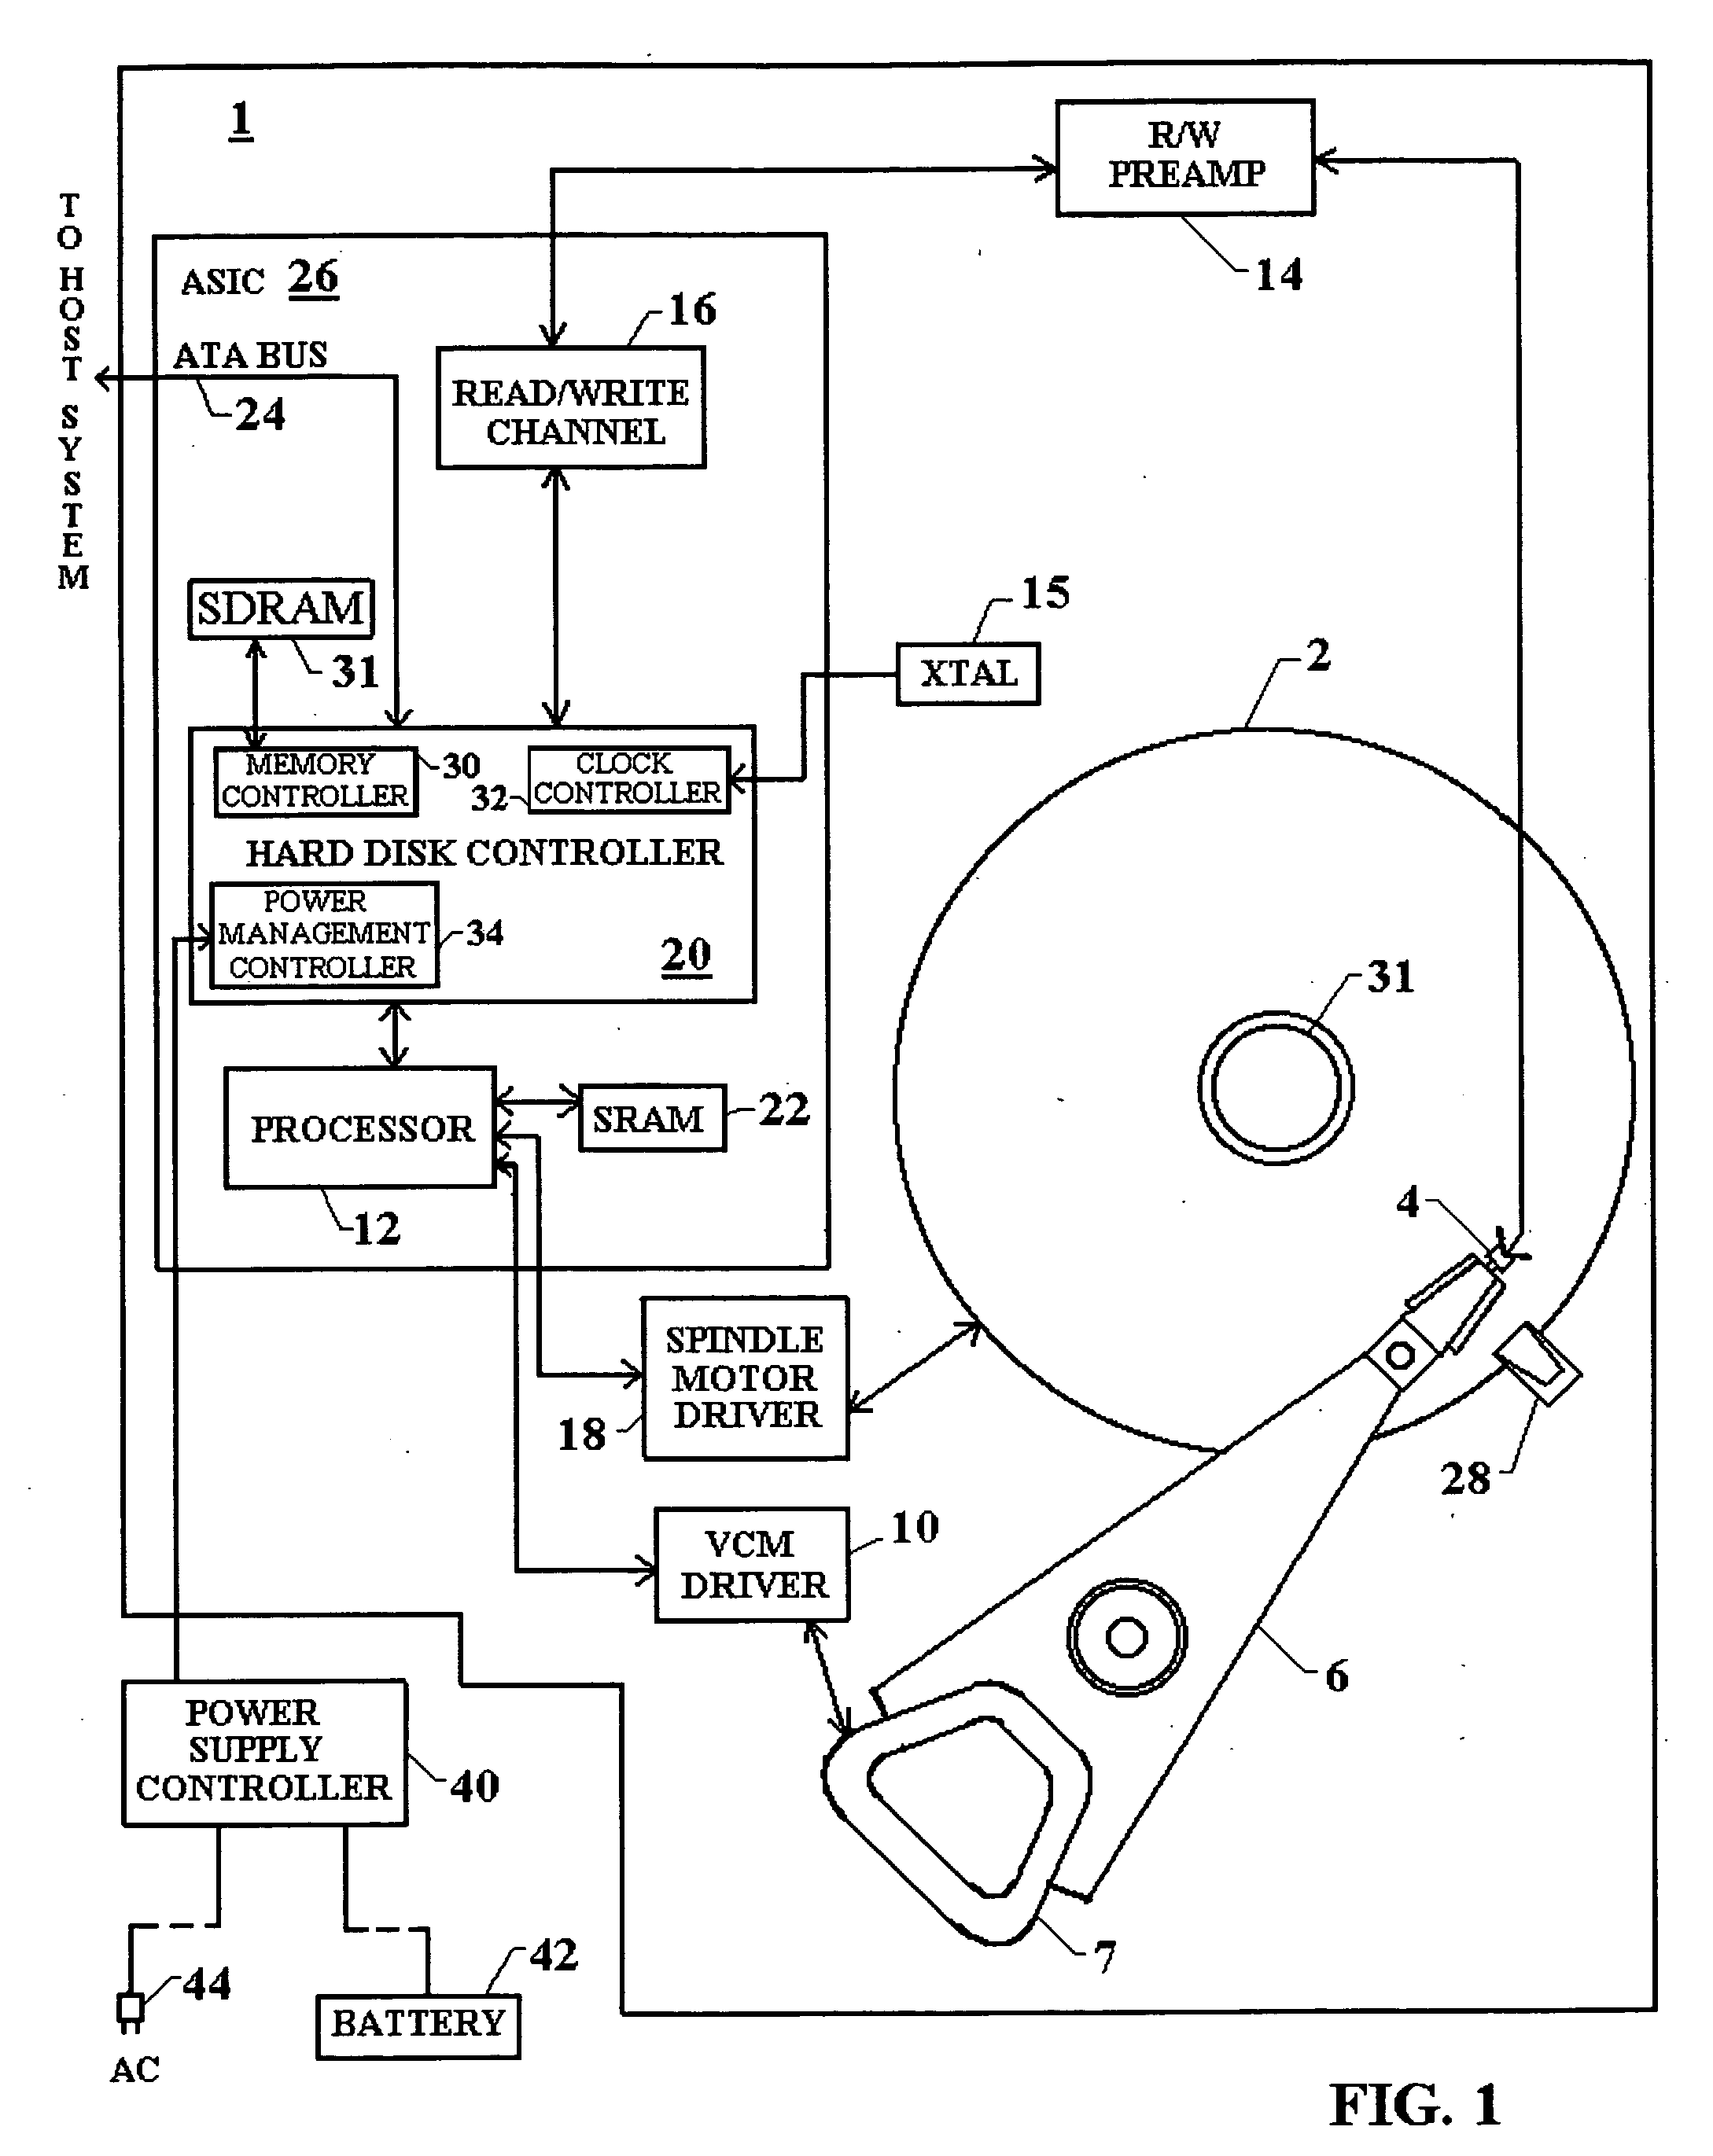 Variable power consumption levels in a hard disk drive